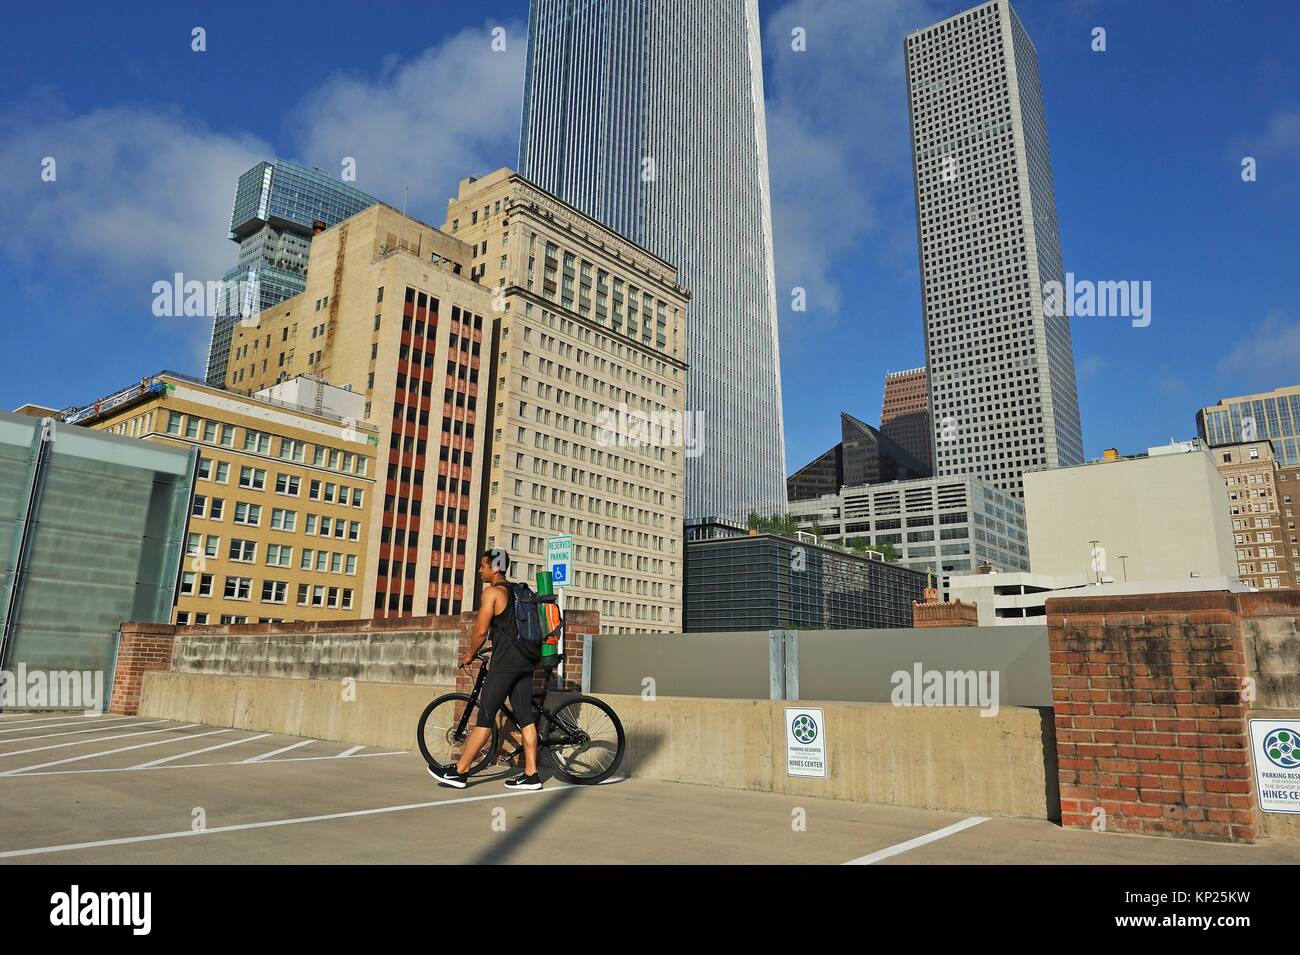 Magnolia Hotel seen from a rooftop, downtown Houston, Texas, United States of America, North America. Stock Photo